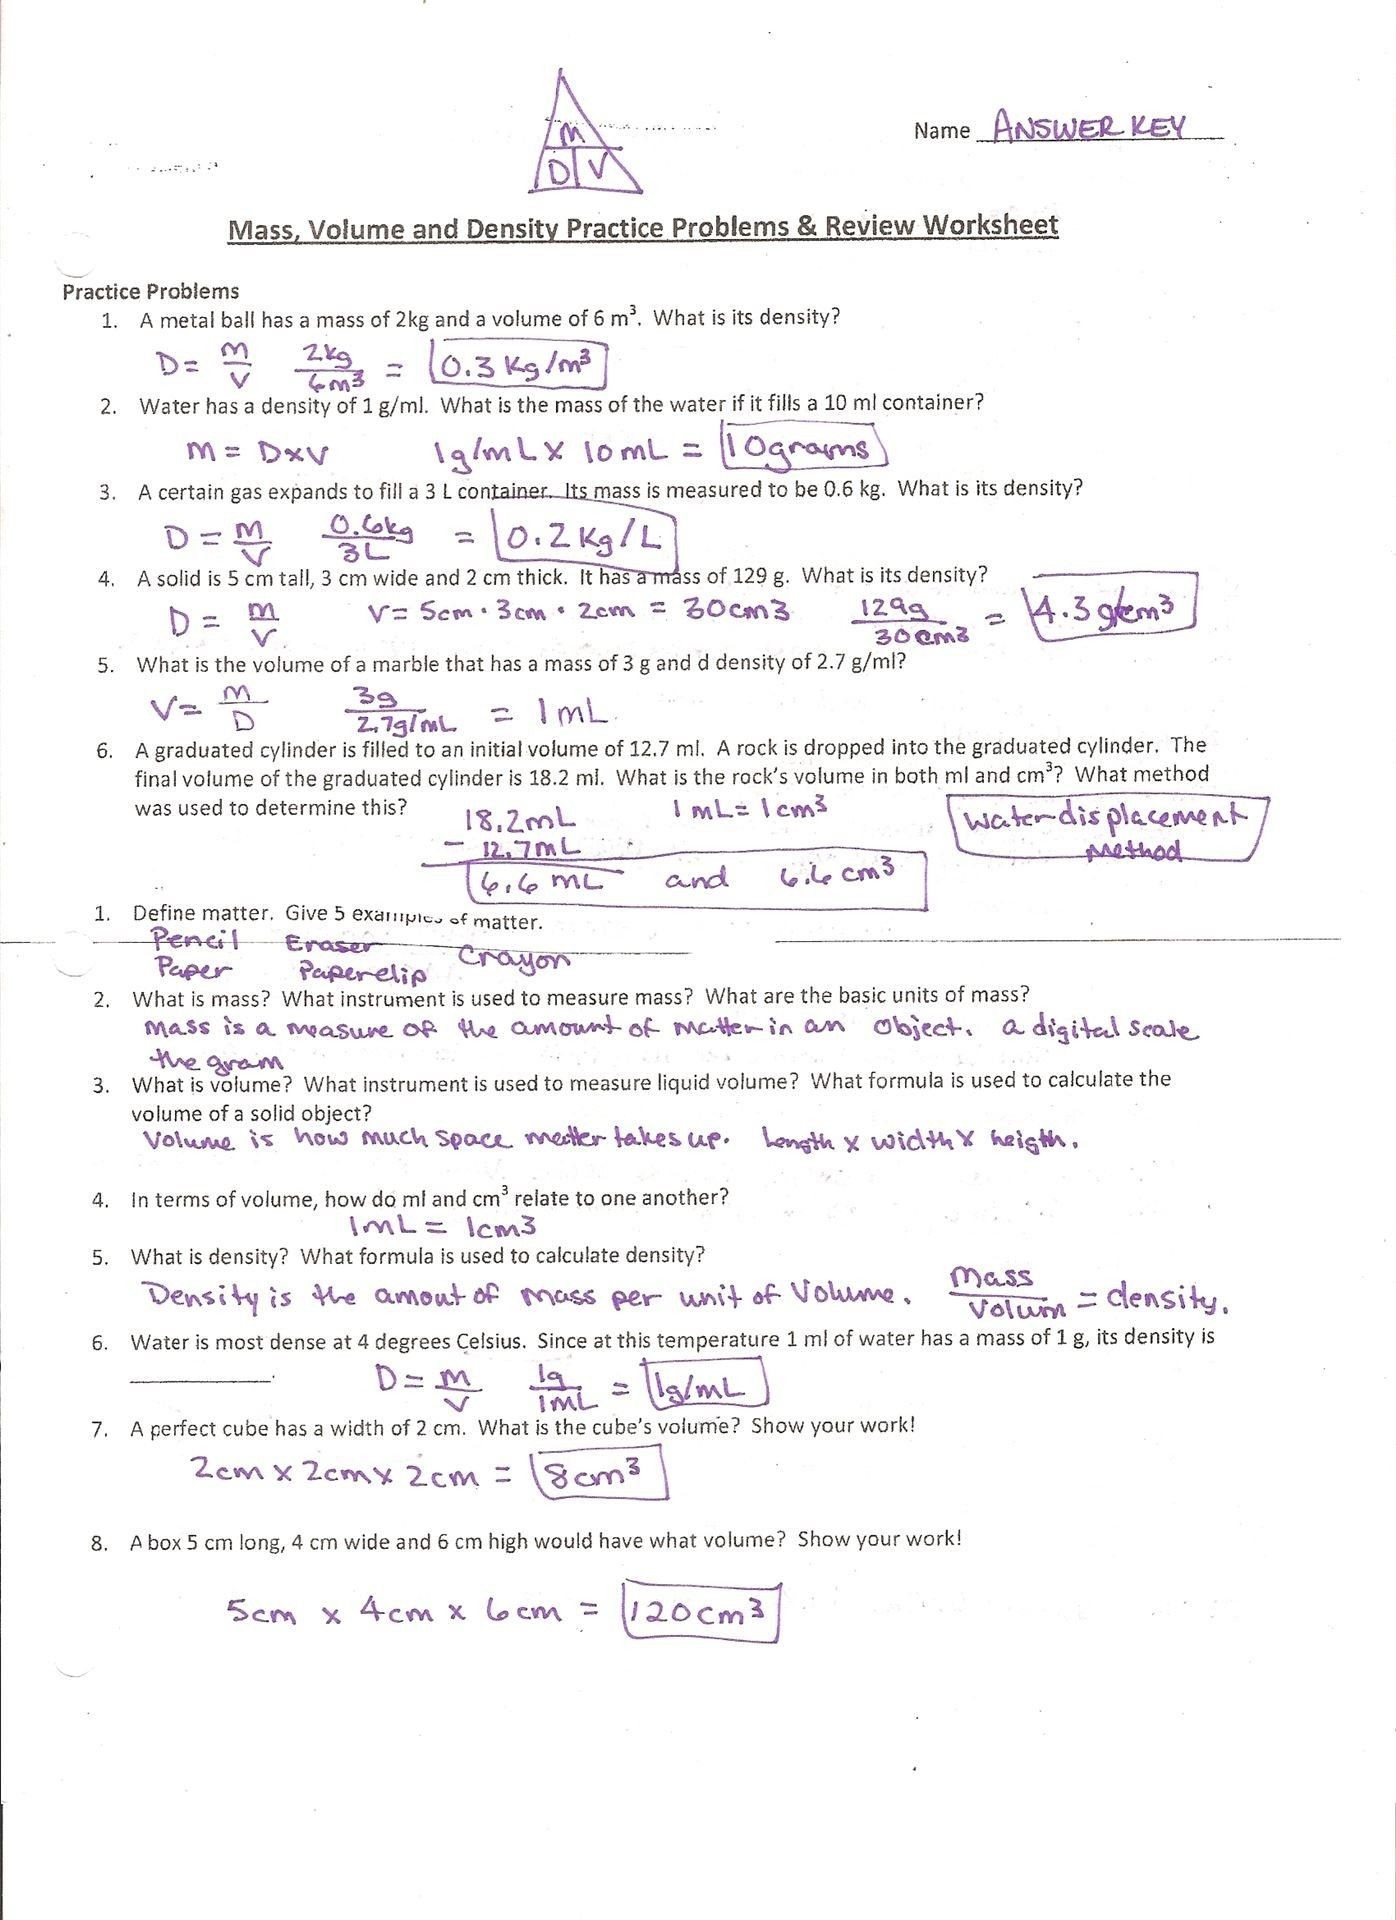 Density Calculations Worksheet Answers Mass Volume Density Worksheet Answers Nidecmege